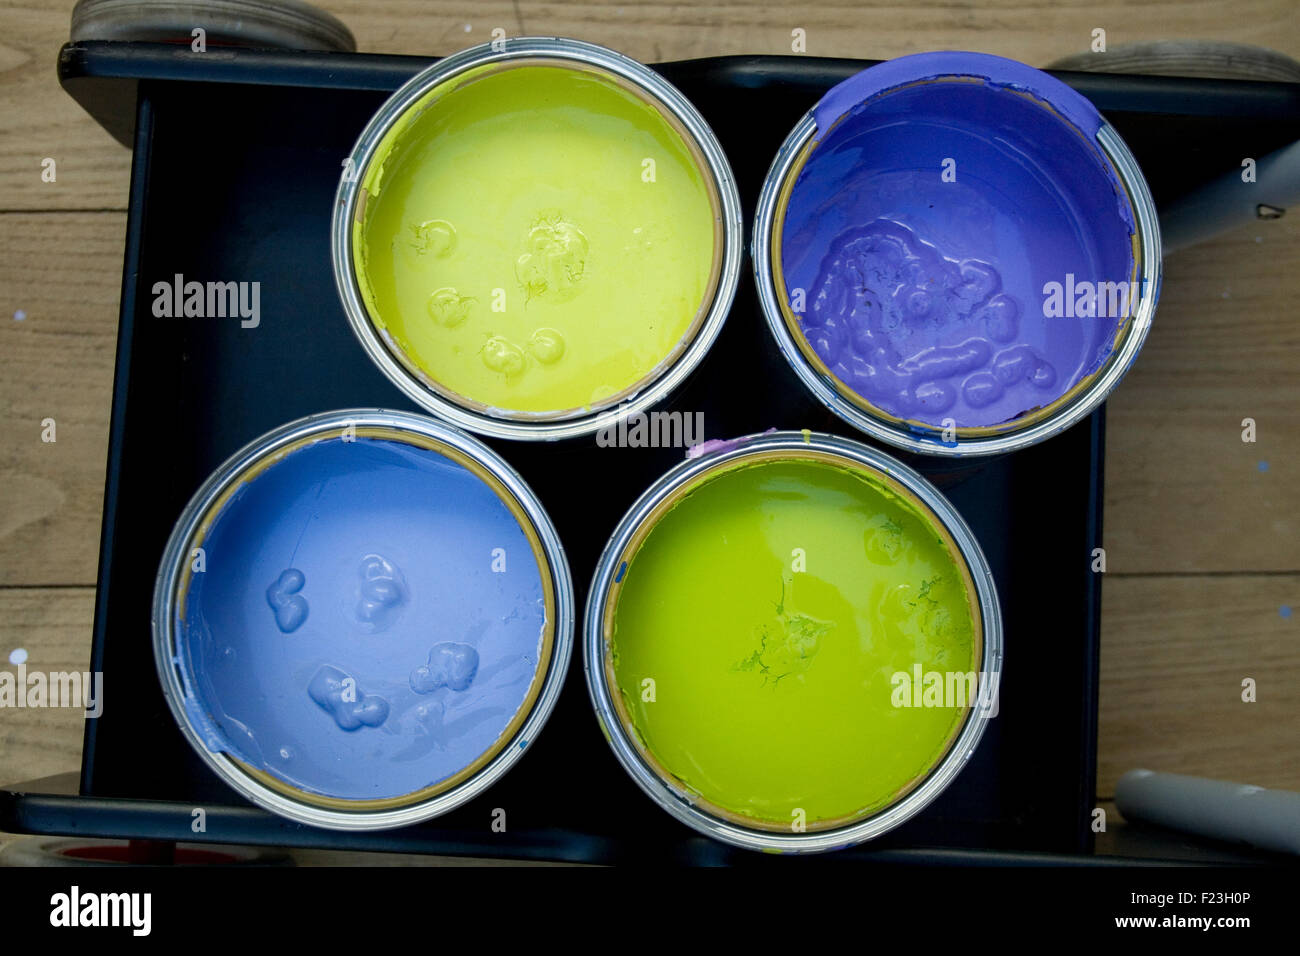 Four cans of various Colors Stock Photo